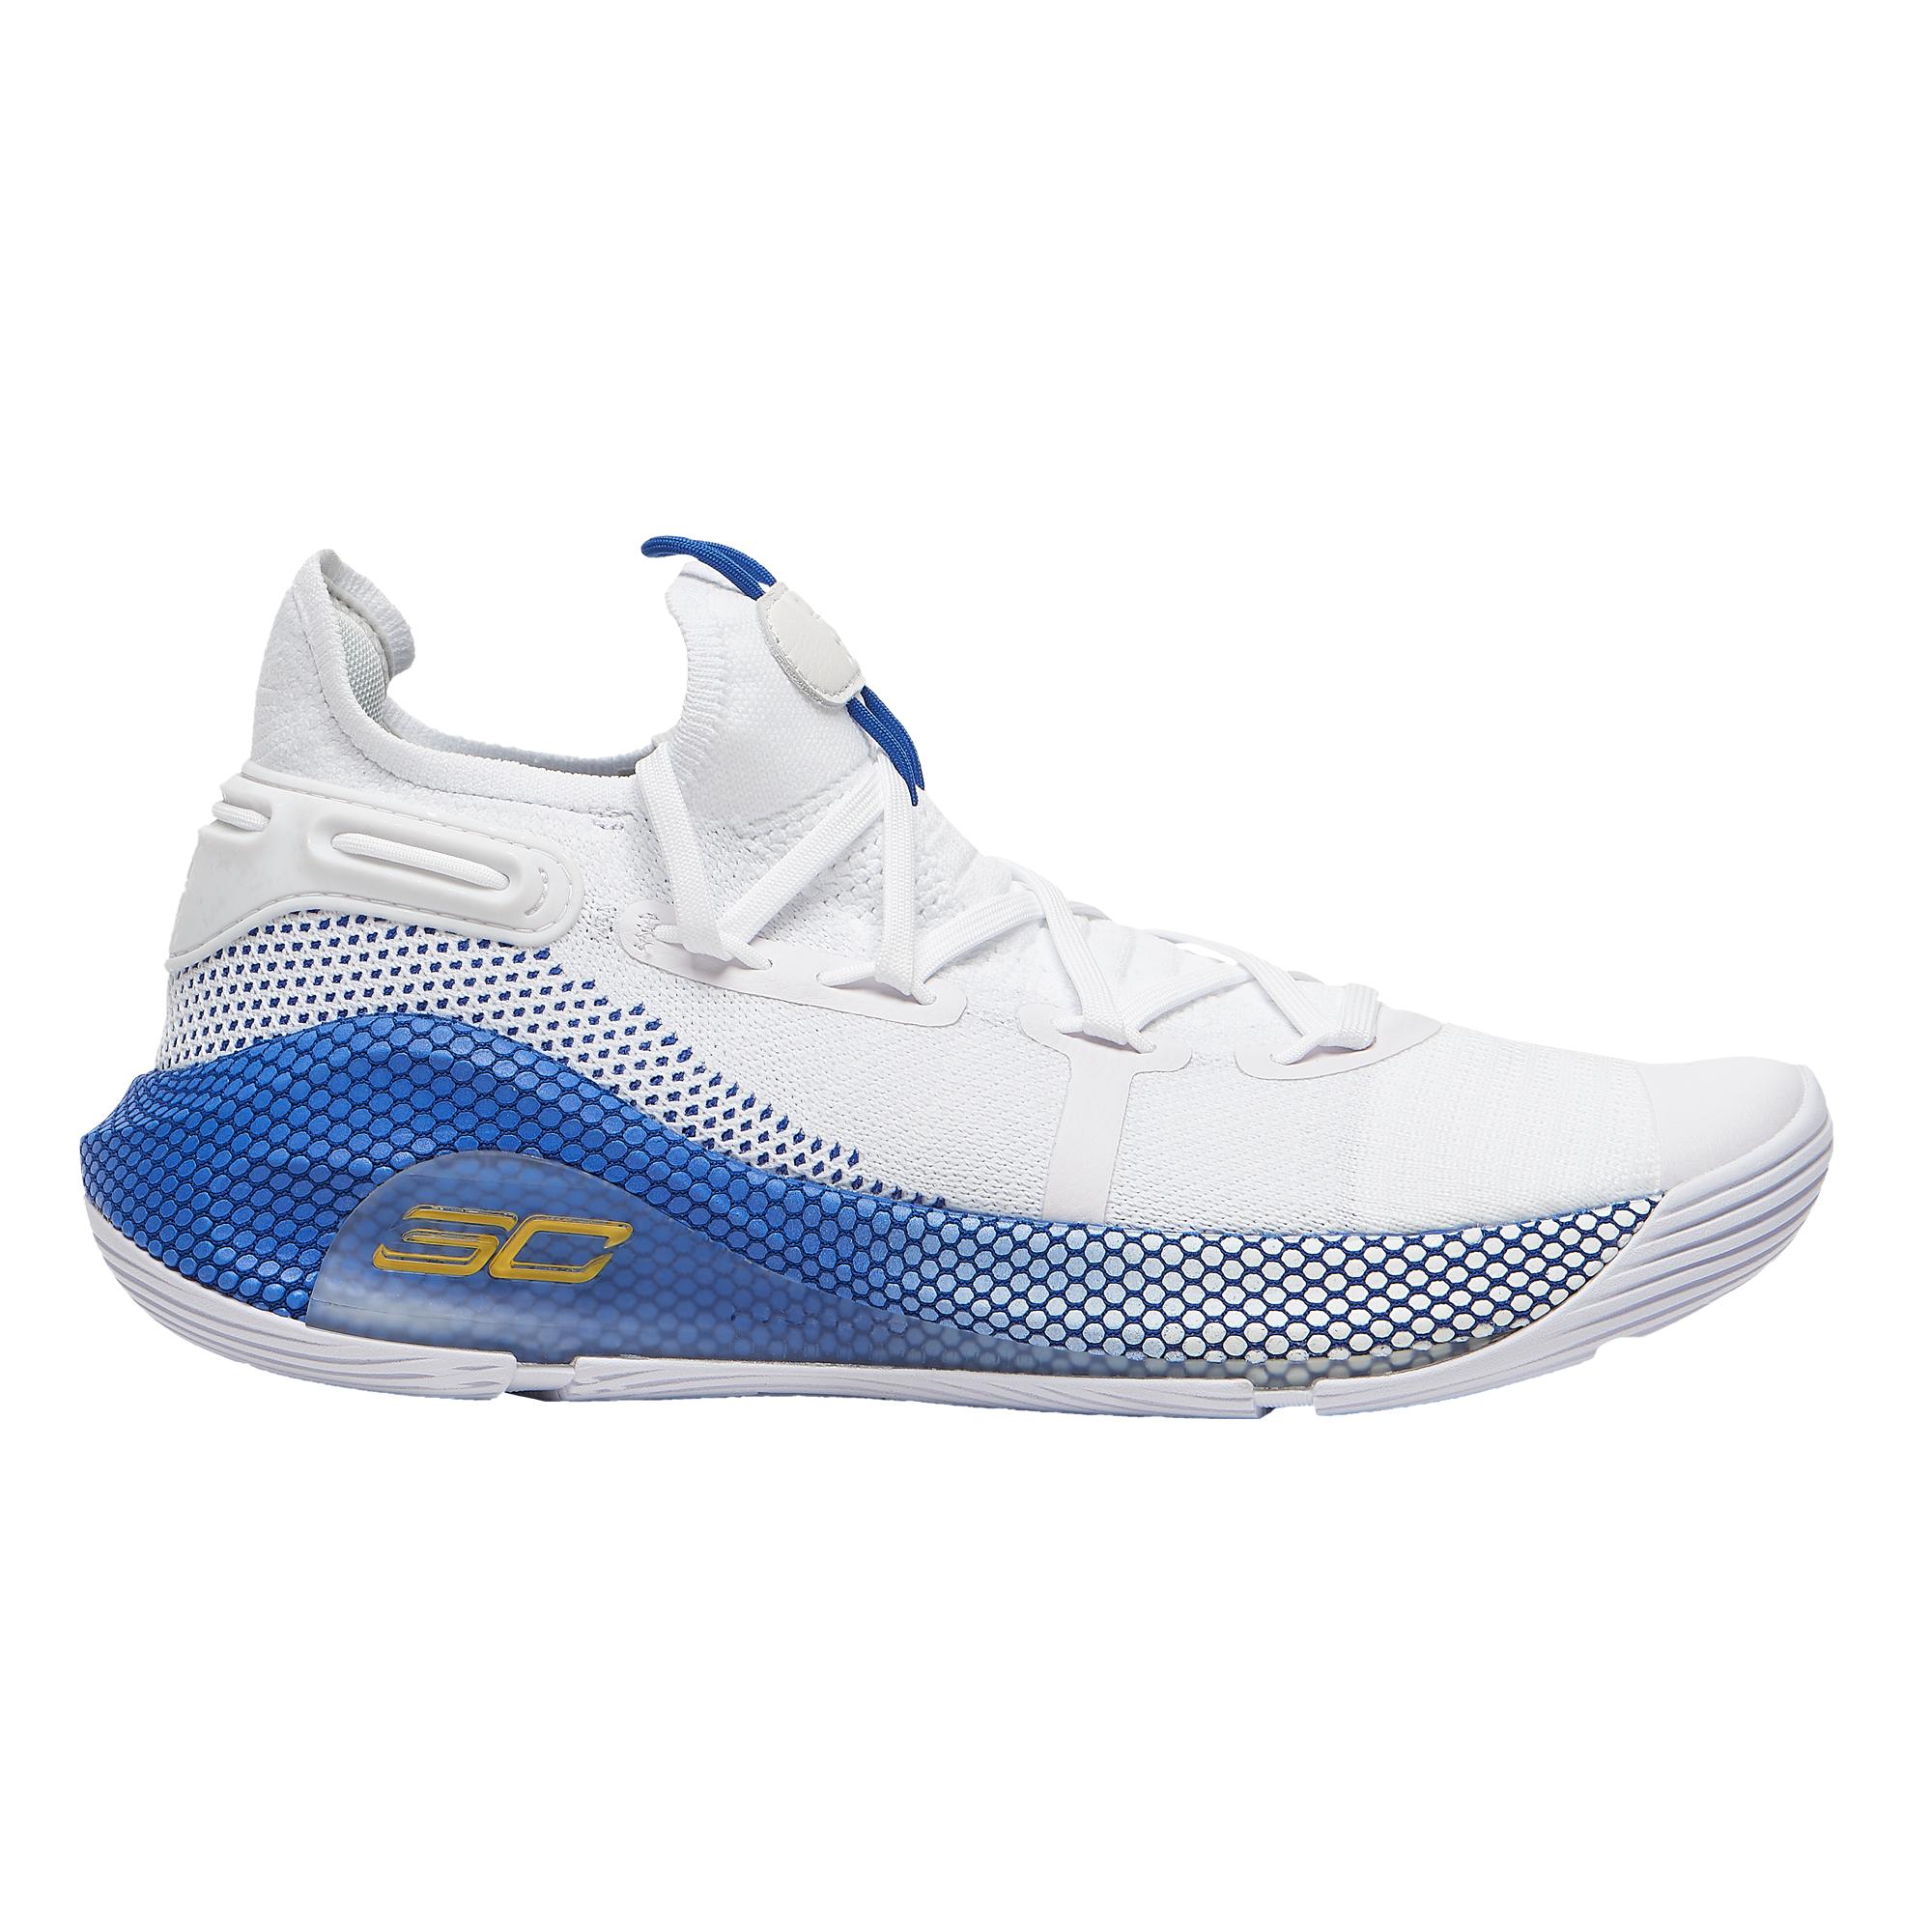 Under Armour Rubber Stephen Curry Curry 